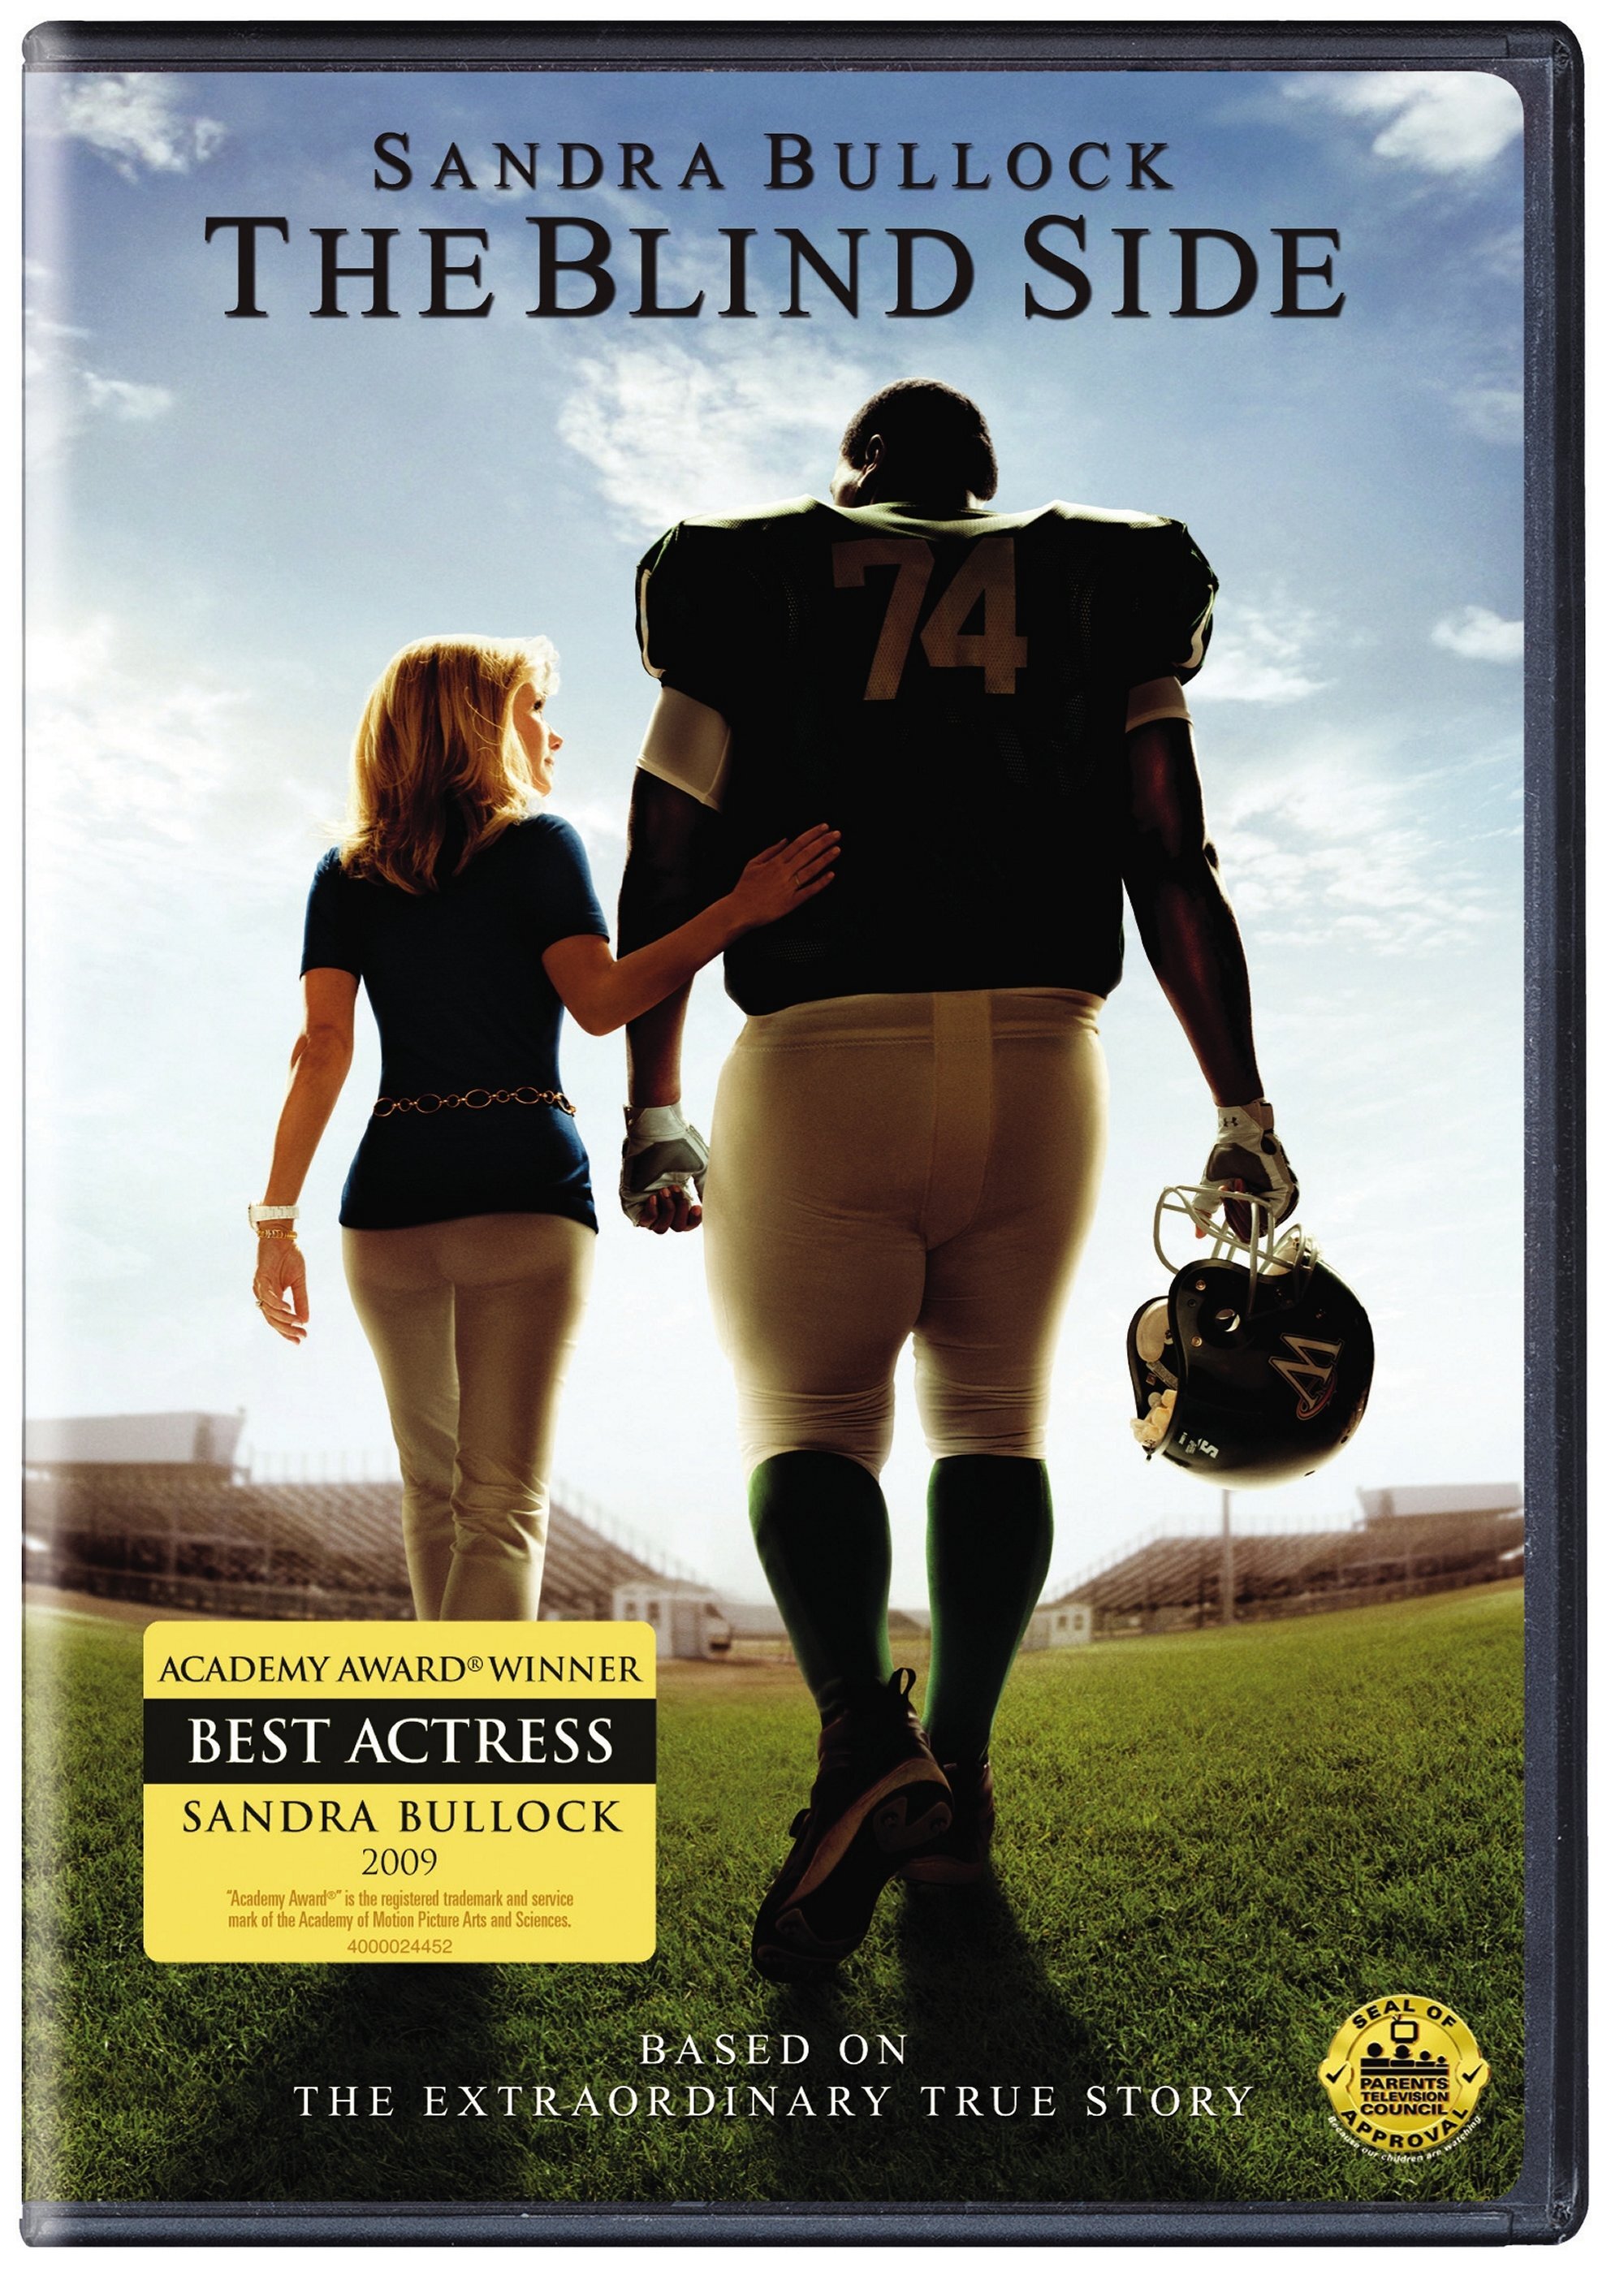 The Blind Side - DVD [ 2009 ]  - Drama Movies On DVD - Movies On GRUV